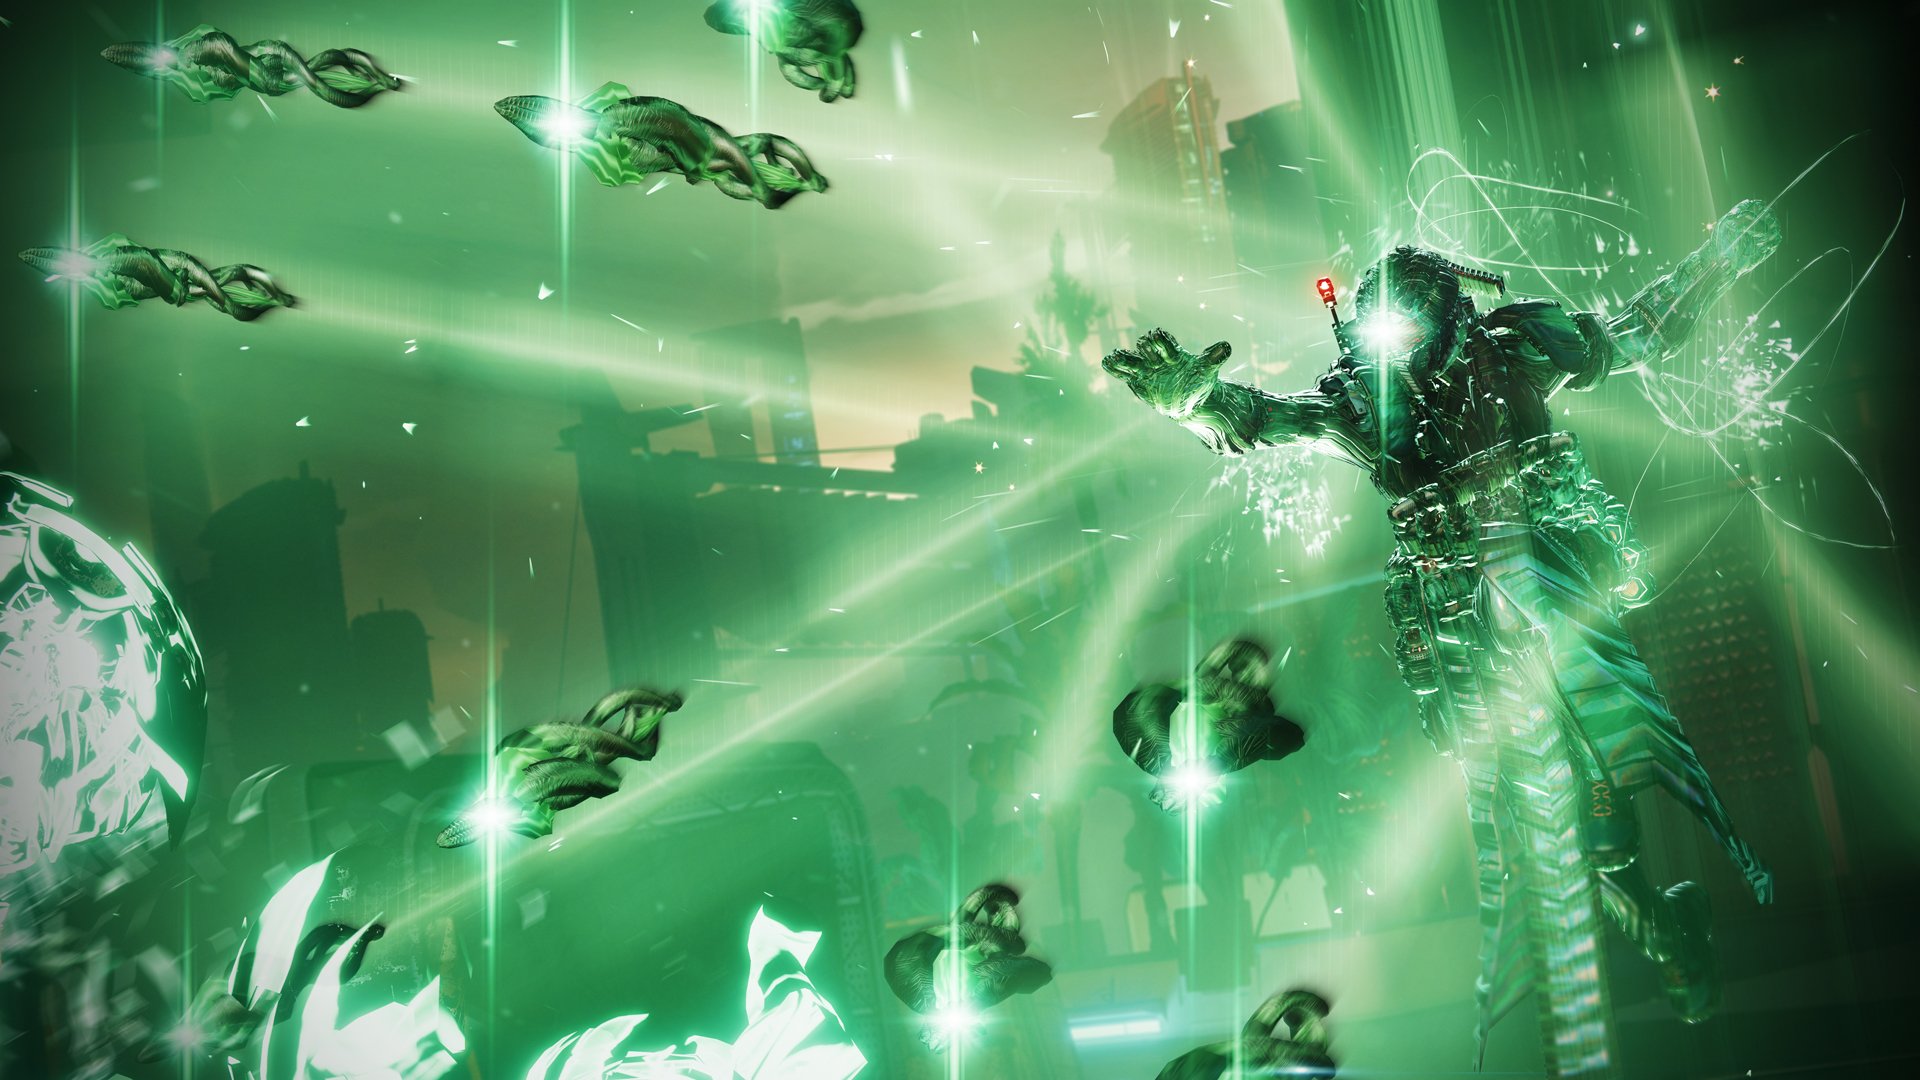 Destiny 2 Showcase Introduces New Darkness Subclass Strand Coming